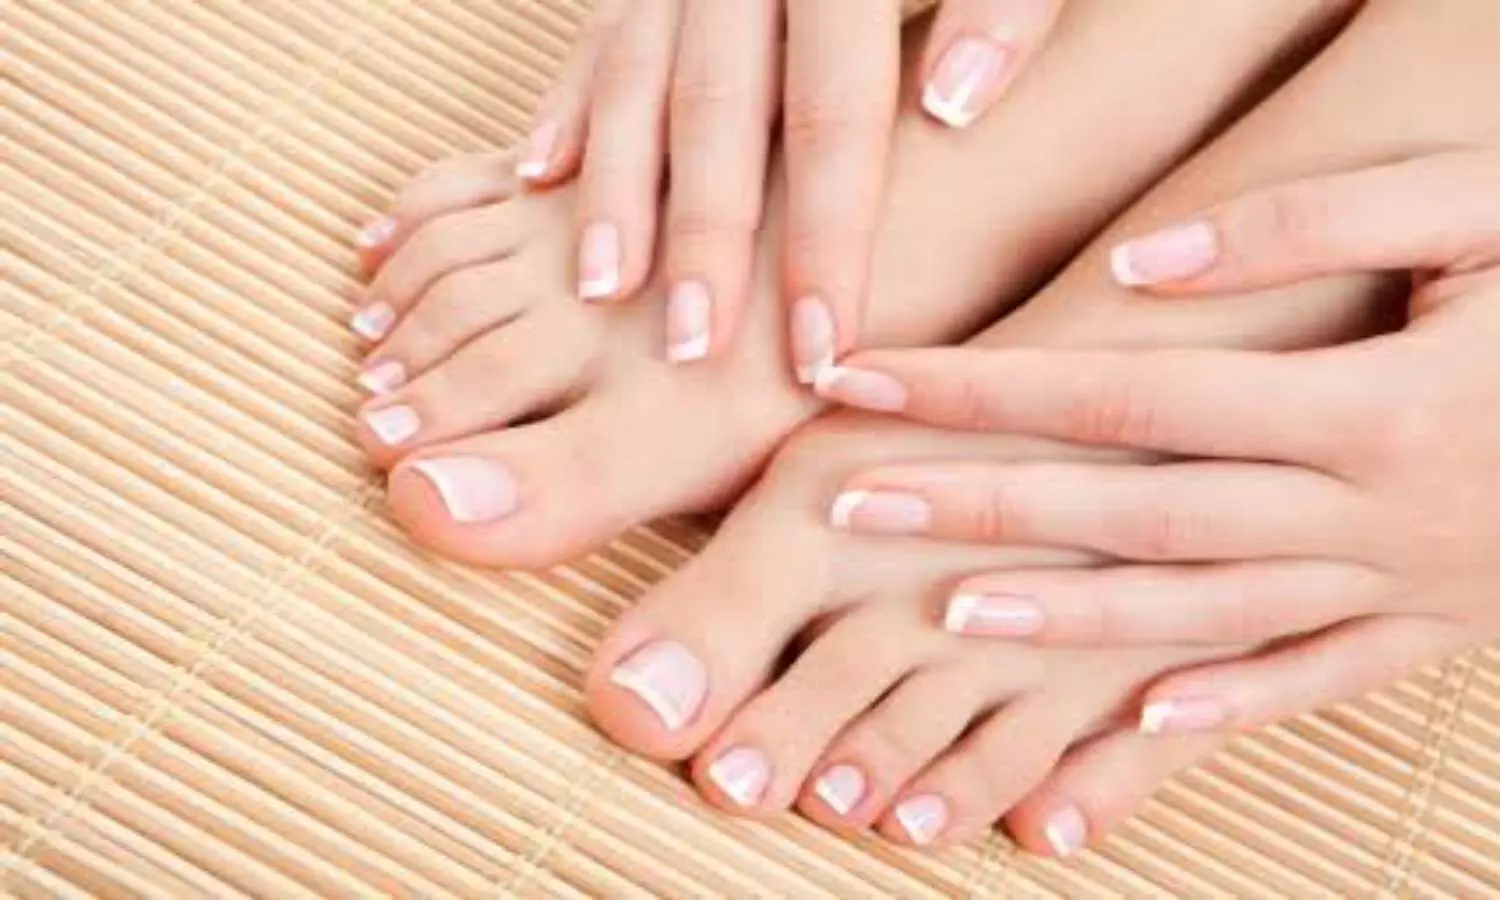 Tips for strong nails